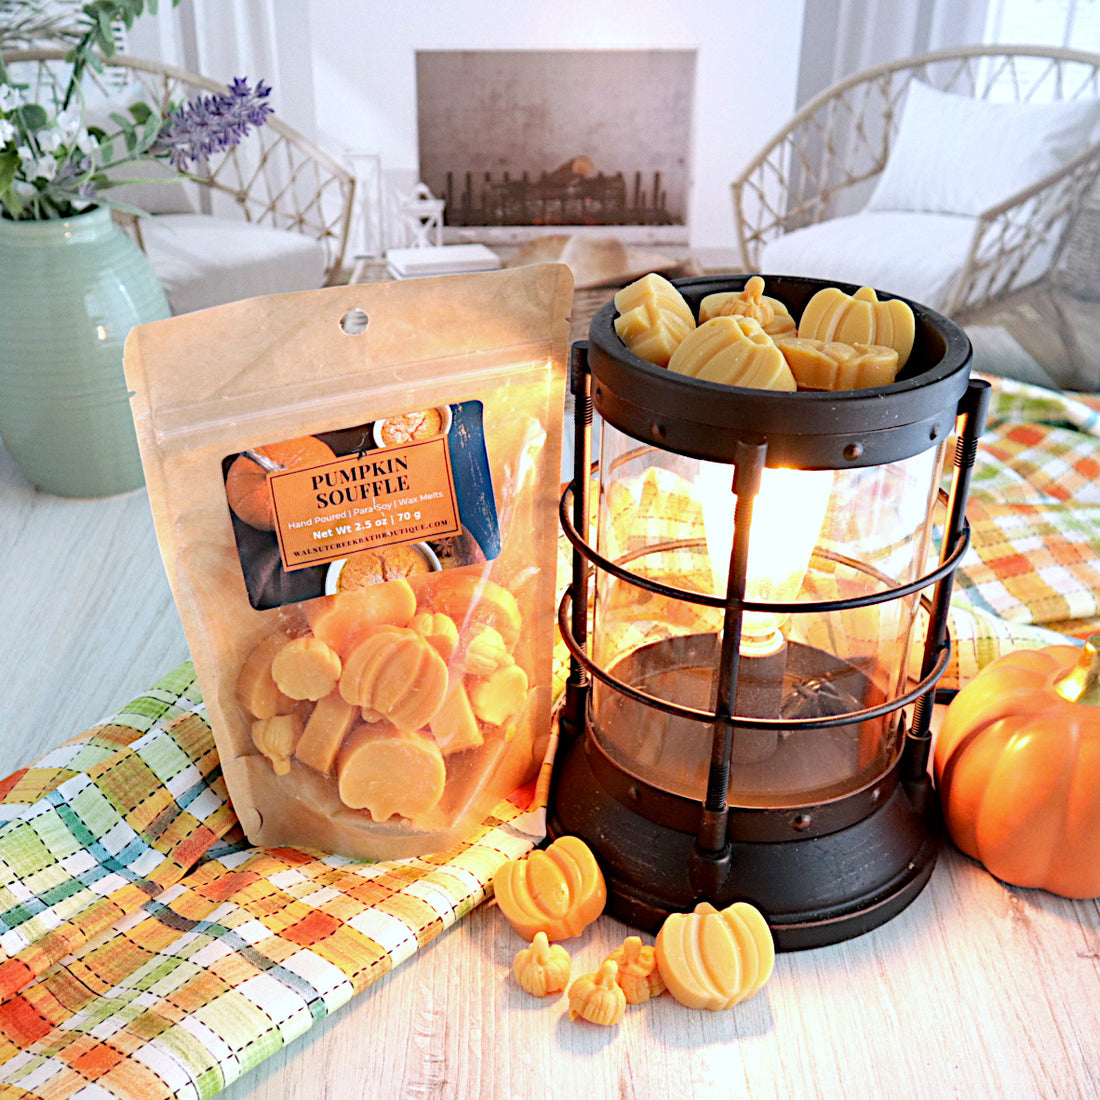 pumpkin souffle wax melt bag standing next to a lit  wax melt burner. there are pieces of wax melts in the burner and also some on the table in front of the burner. the wax is in the shape of large and small pumpkins and is orange om color. there is a plaid fabric in the colors of orange, yellow, green and white that is running through the scene. this is all sitting on a washed out wooden base with a couple of chairs in the background next to a fireplace